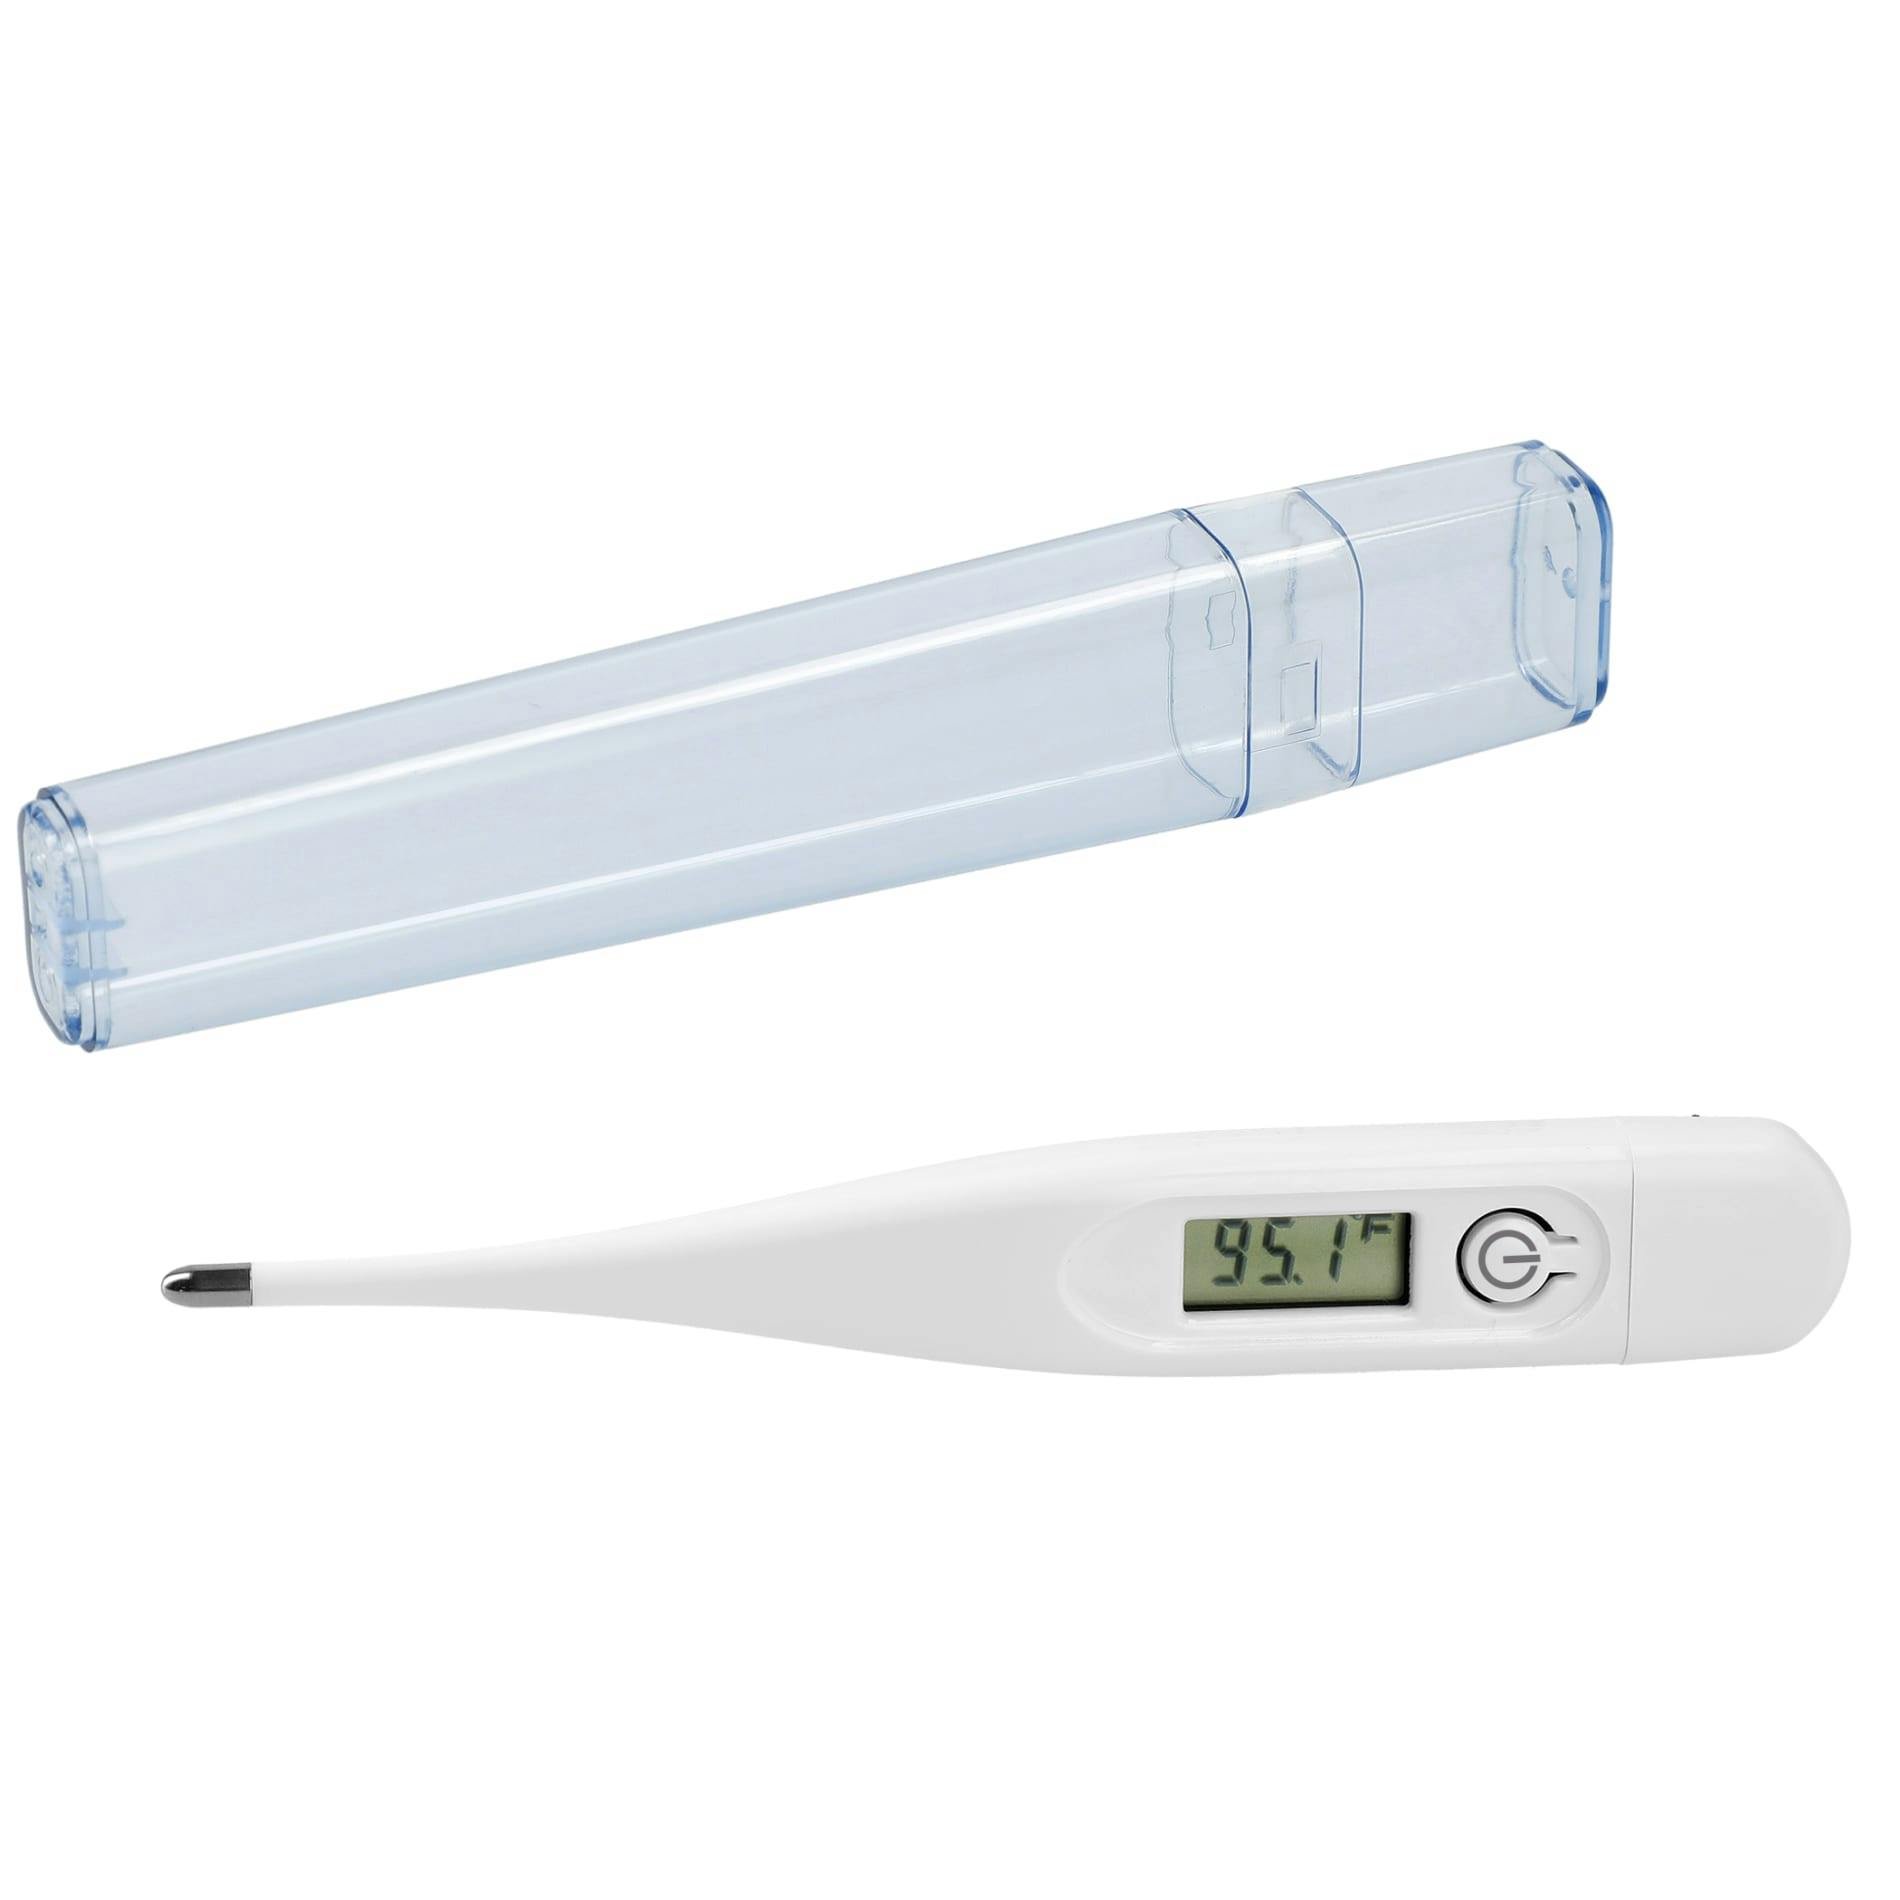 Digital Thermometer - additional Image 1